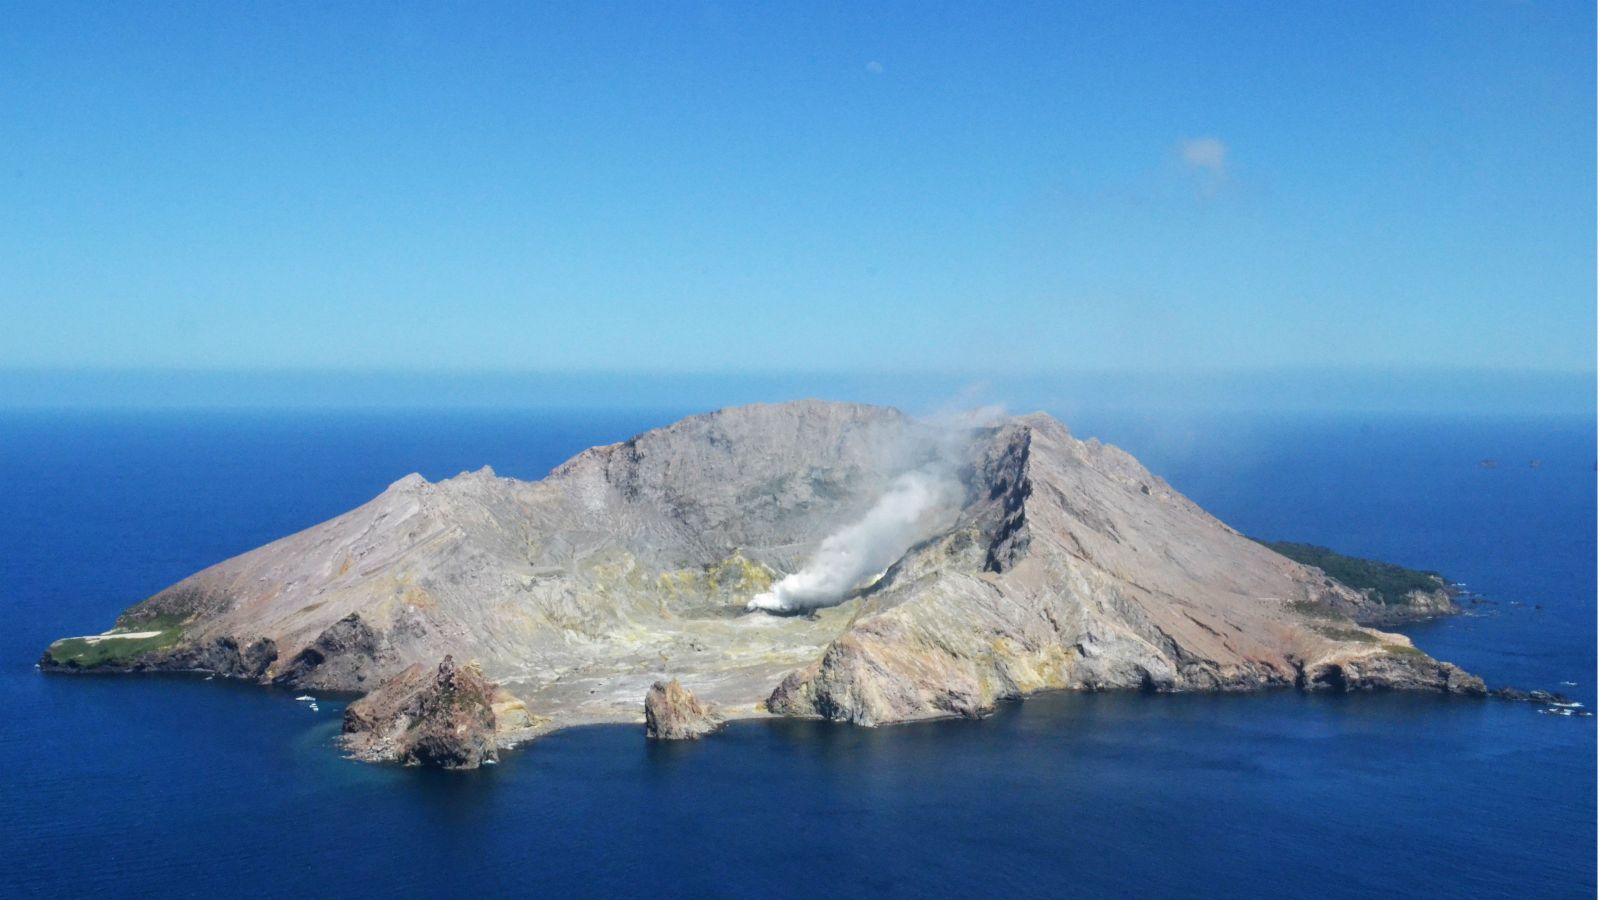 Whaakari / White Island, a volcanic rupture in earth's crust, with a plume of toxic smoke escaping from its magmatic, subterranean heart.